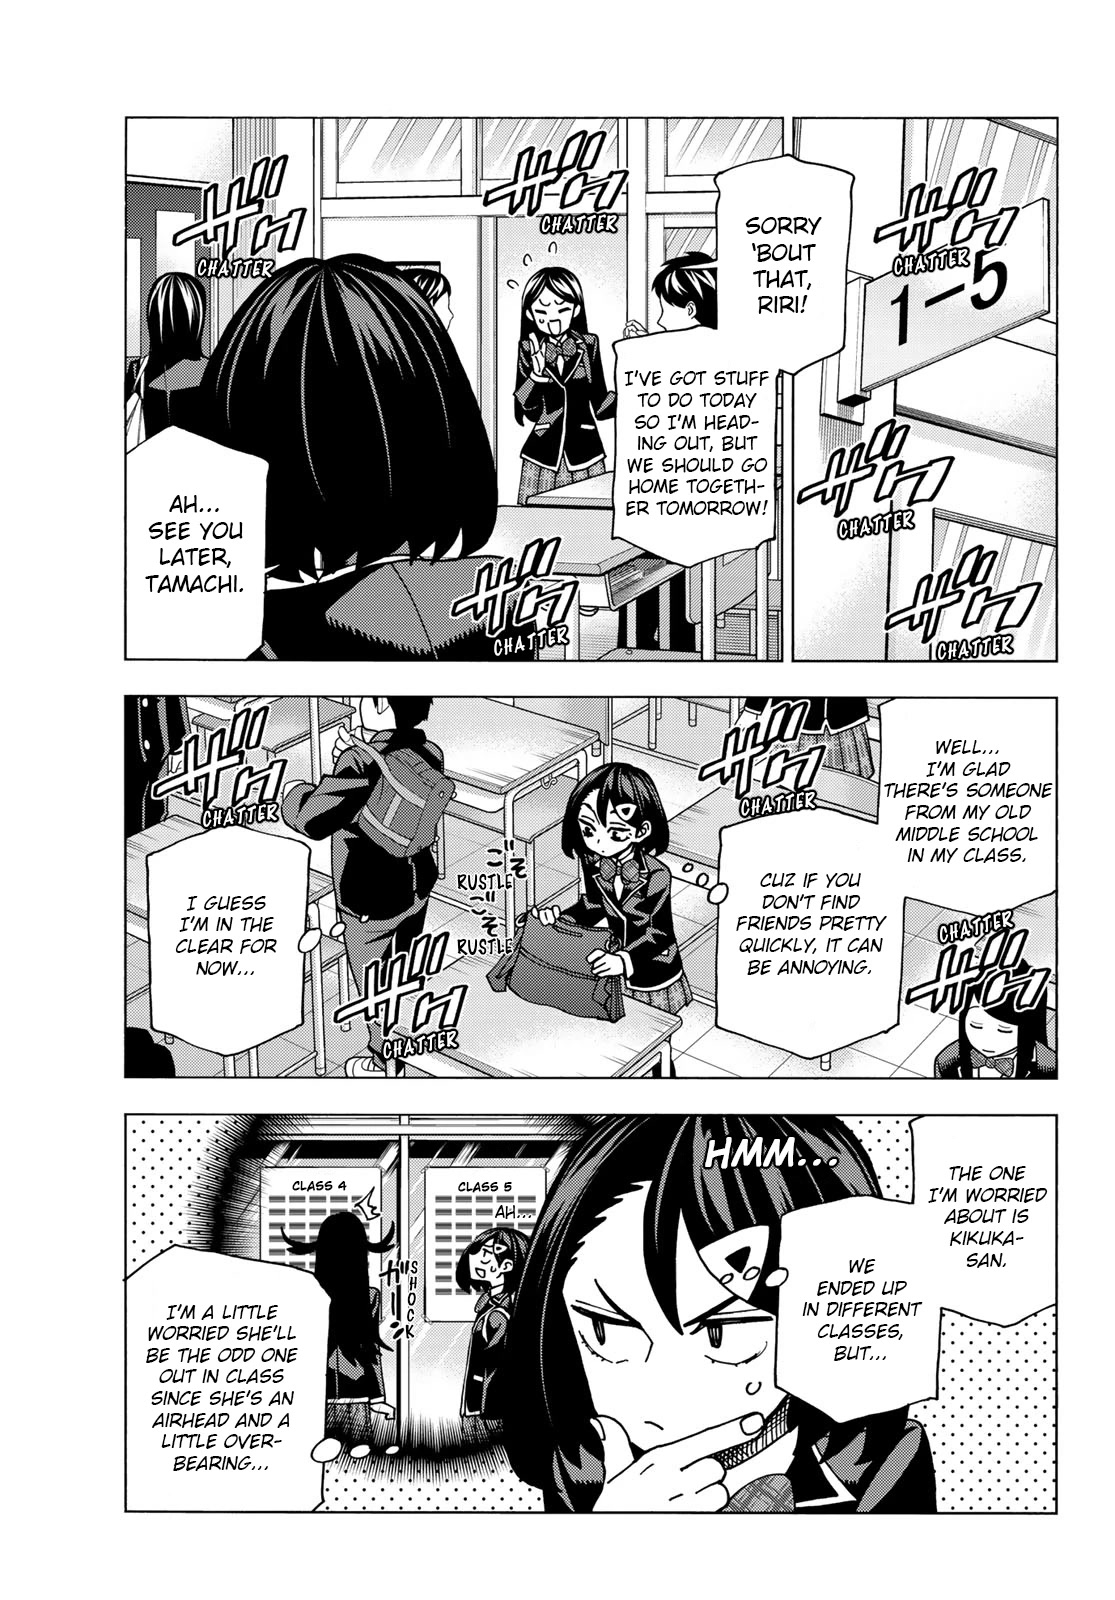 The Story Between A Dumb Prefect And A High School Girl With An Inappropriate Skirt Length - Page 3